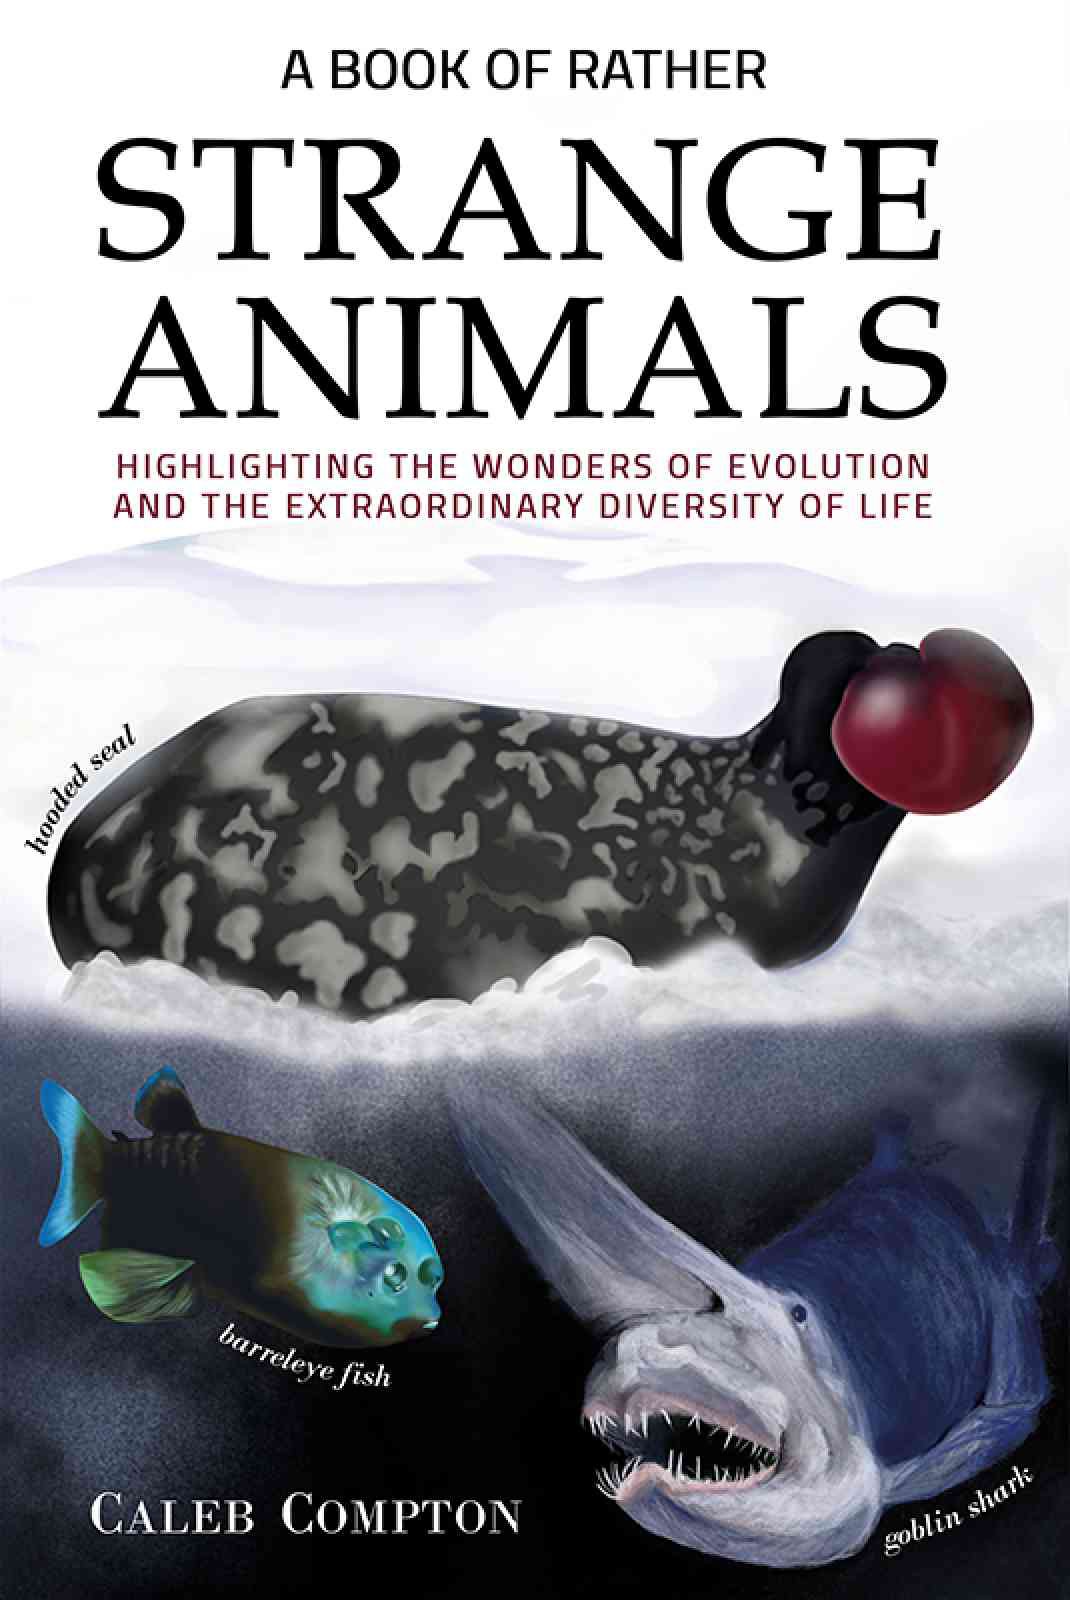 A Book of Rather Strange Animals by Caleb Compton Featured in an Article on Fupping.com